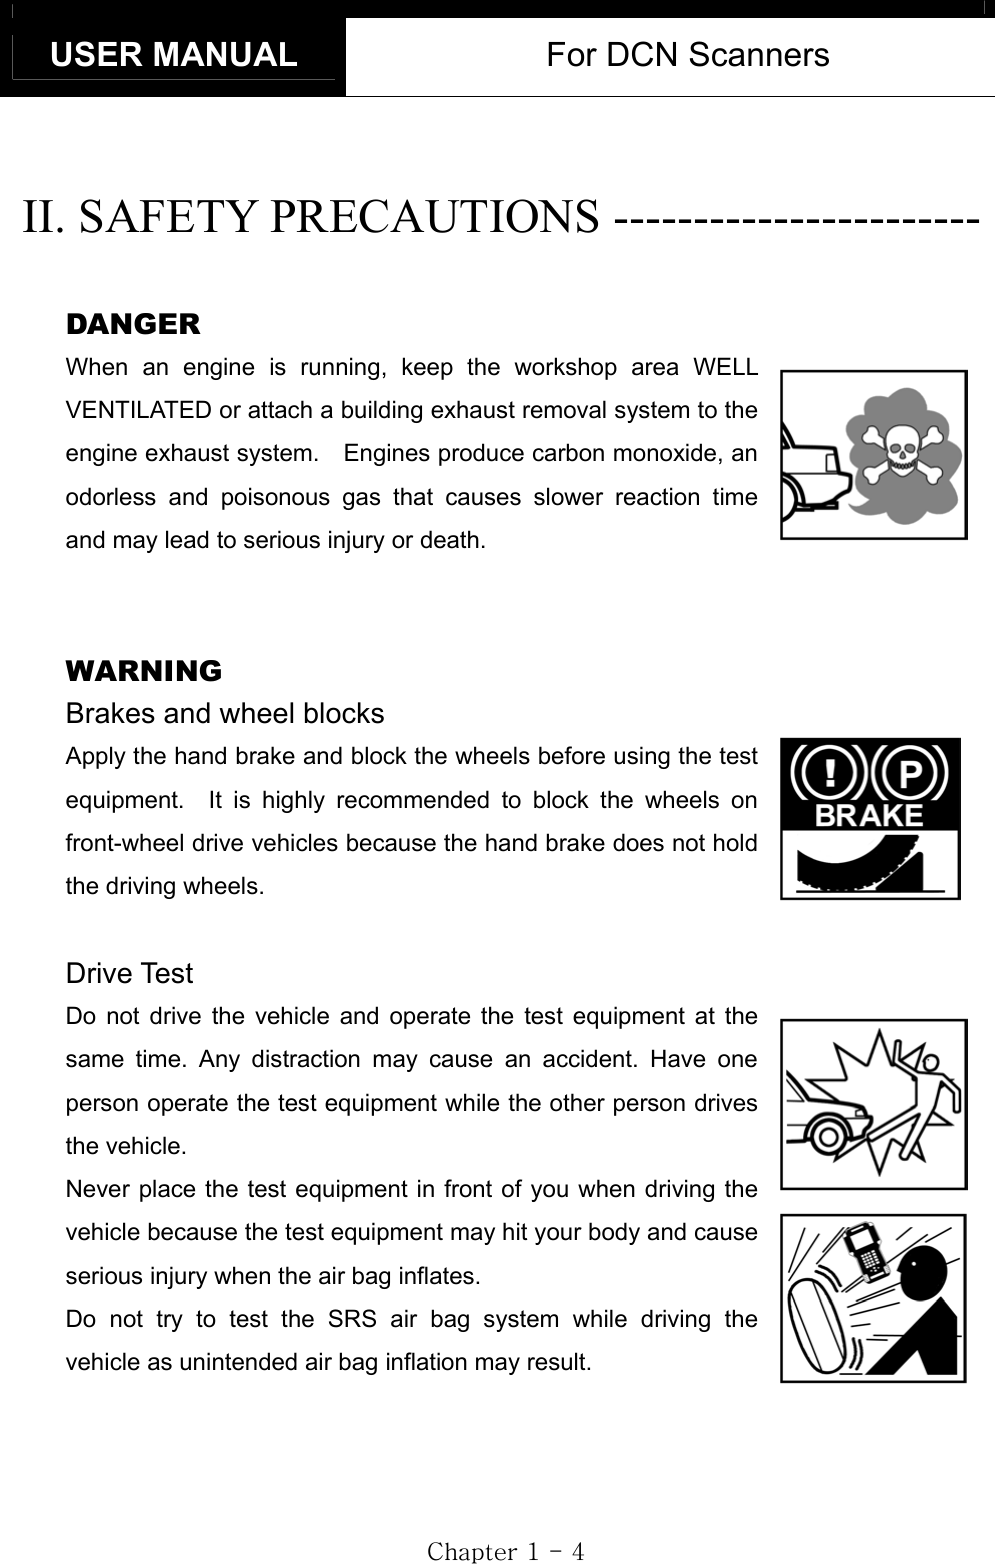 USER MANUAL  For DCN Scanners GjGXGTG[GGII. SAFETY PRECAUTIONS ----------------------- GDANGER When an engine is running, keep the workshop area WELL VENTILATED or attach a building exhaust removal system to the engine exhaust system.    Engines produce carbon monoxide, an odorless and poisonous gas that causes slower reaction time and may lead to serious injury or death. GGWARNING Brakes and wheel blocks Apply the hand brake and block the wheels before using the test equipment.  It is highly recommended to block the wheels on front-wheel drive vehicles because the hand brake does not hold the driving wheels. GDrive Test Do not drive the vehicle and operate the test equipment at the same time. Any distraction may cause an accident. Have one person operate the test equipment while the other person drives the vehicle. Never place the test equipment in front of you when driving the vehicle because the test equipment may hit your body and cause serious injury when the air bag inflates.   Do not try to test the SRS air bag system while driving the vehicle as unintended air bag inflation may result. 